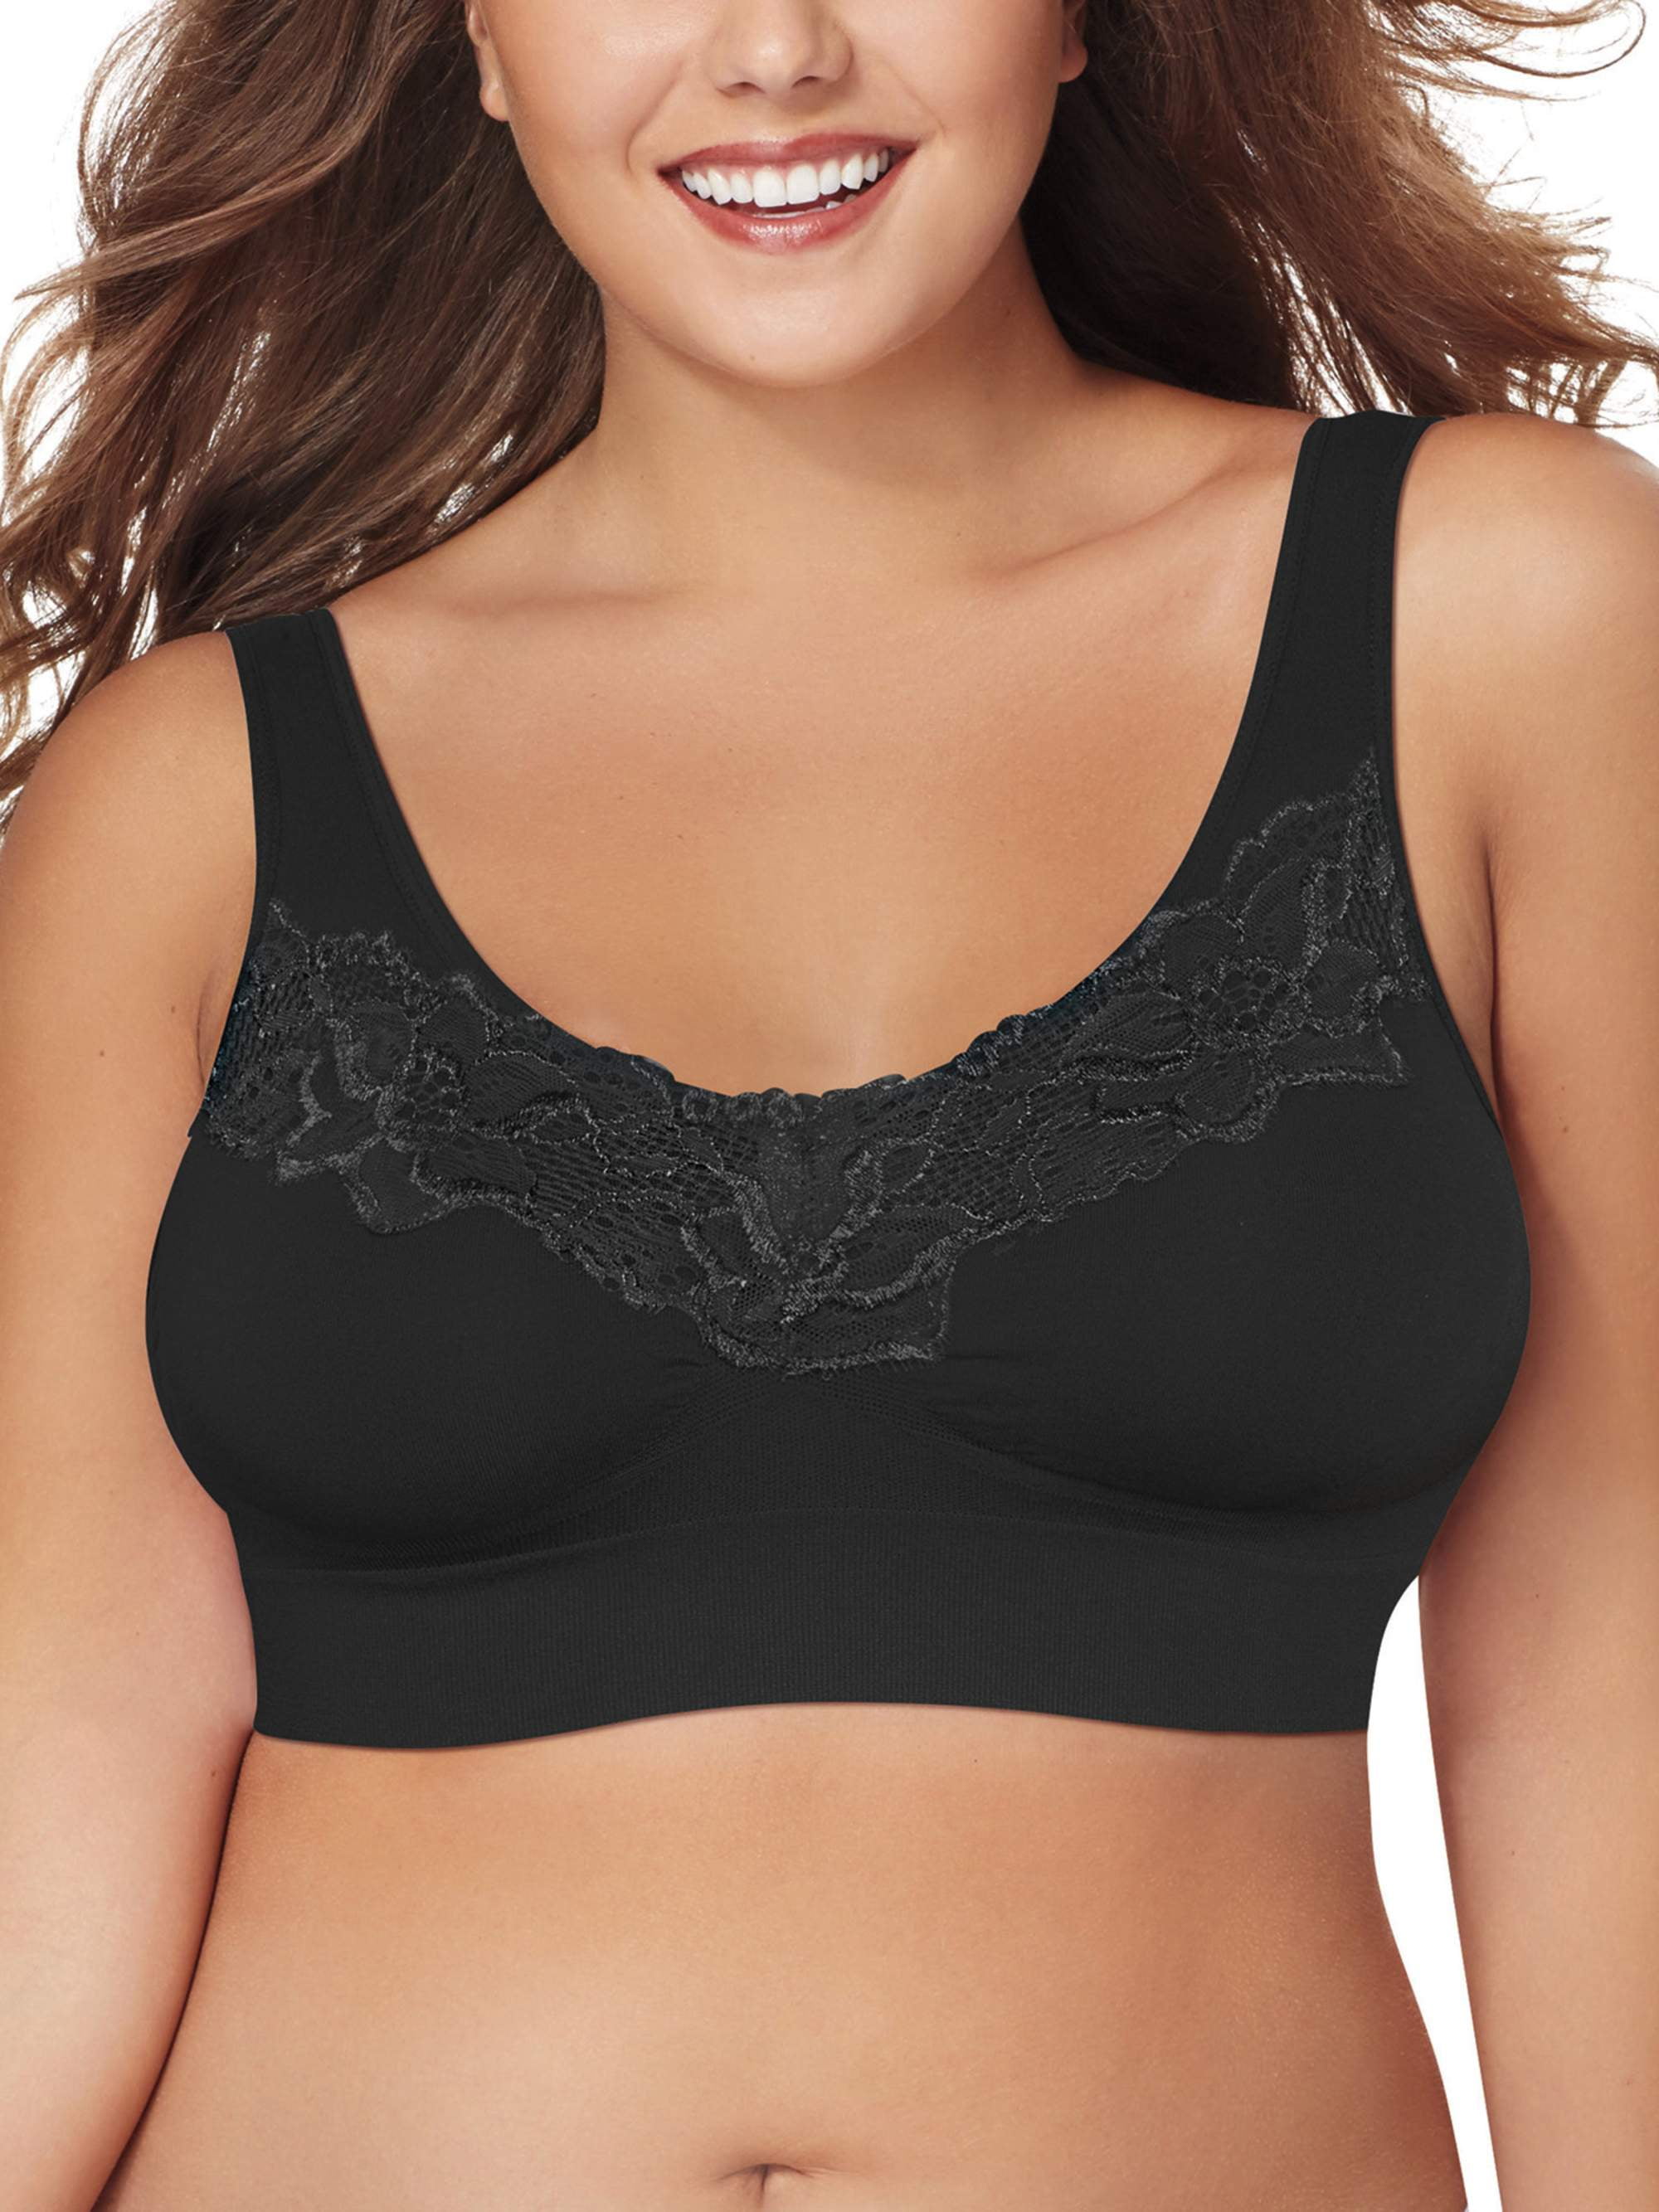 Just My Size Women's Pure Comfort Wirefree Seamless Lace Bra